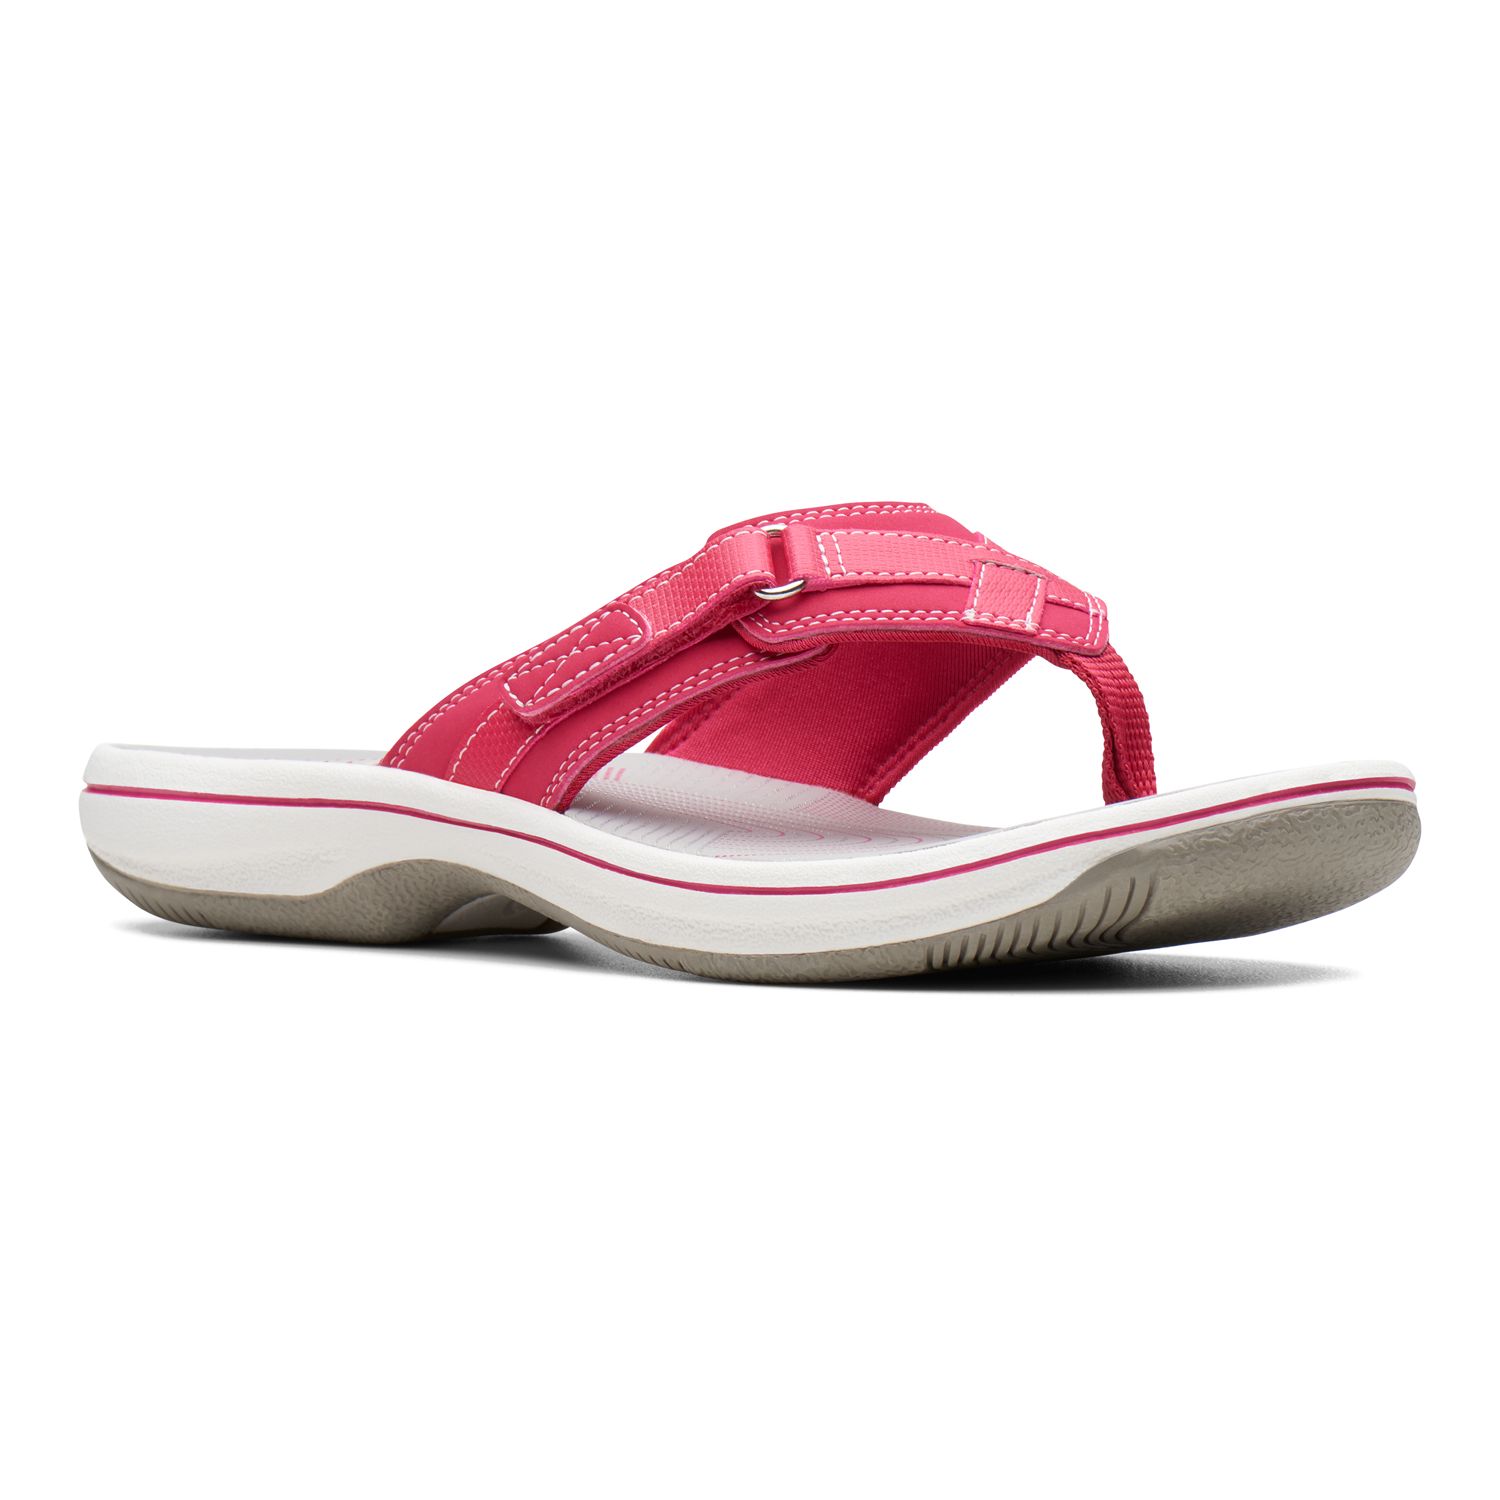 womens sandals clearance